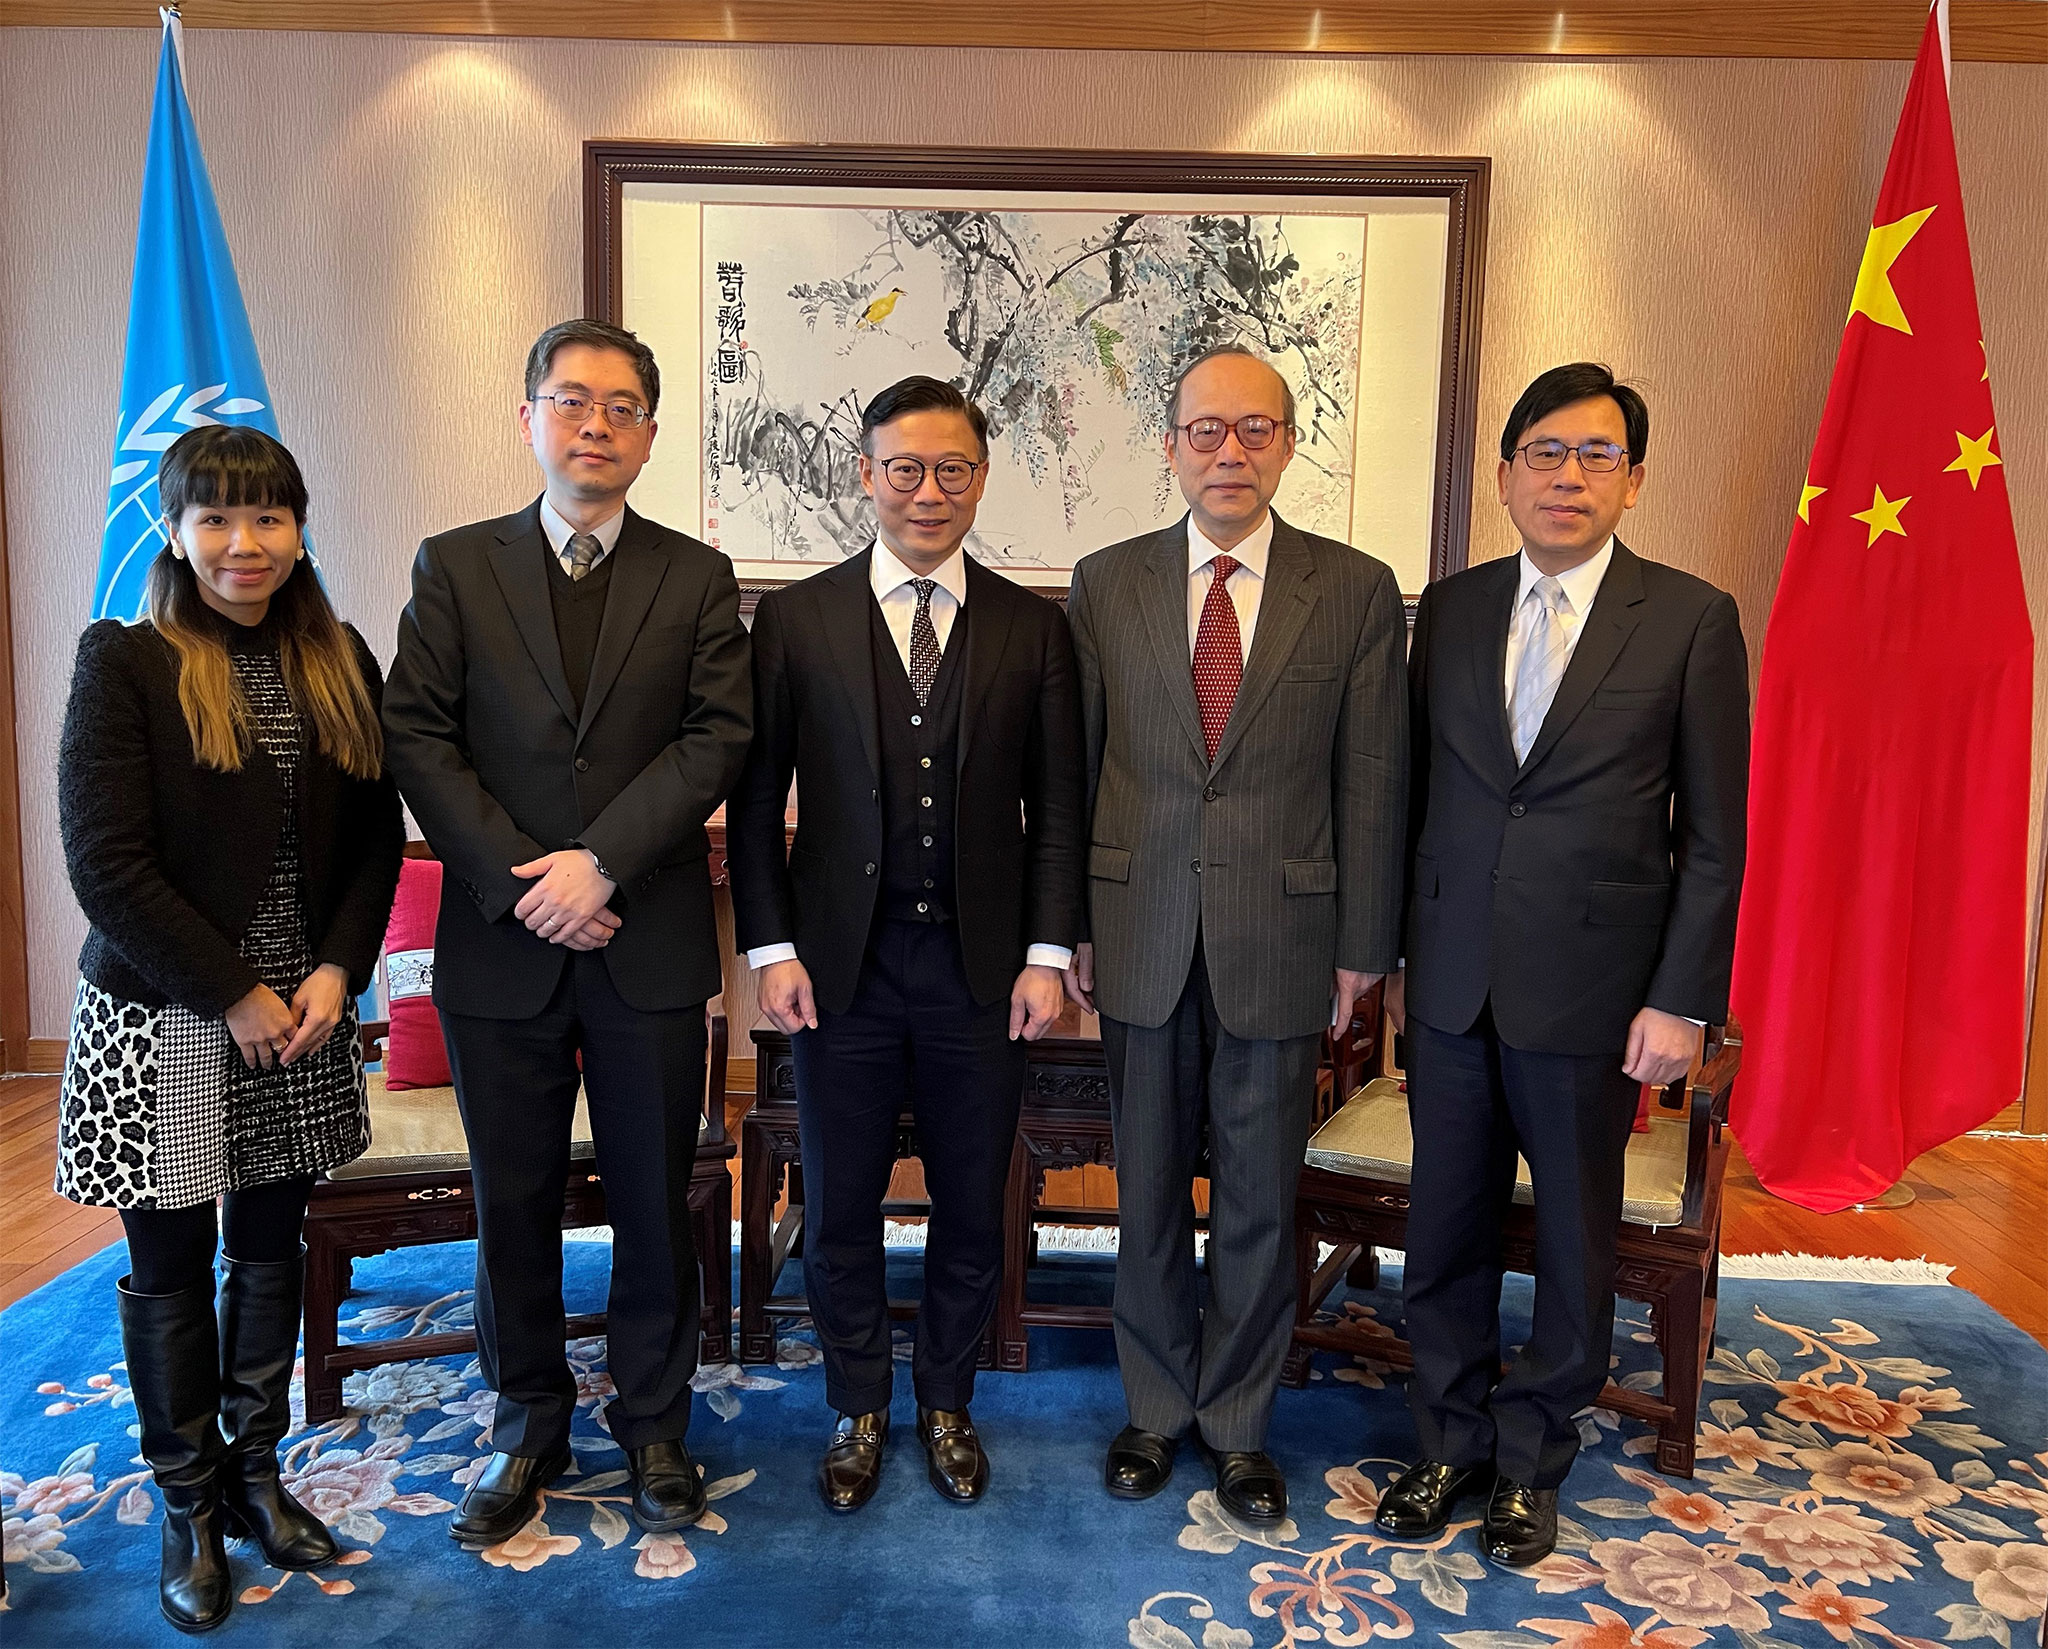 The Deputy Secretary for Justice, Mr Cheung Kwok-kwan (centre), accompanied by the Permanent Representative of the Hong Kong Special Administrative Region of China to the World Trade Organization (WTO), Mr Laurie Lo (first right), the Law Officer (International Law) of the Department of Justice, Dr James Ding (second left), and Acting Principal Government Counsel of the Department of Justice, Ms Peggy Au Yeung (first left), called on the Ambassador Extraordinary and Plenipotentiary, Permanent Representative of the People's Republic of China to the United Nations Office at Geneva and other International Organizations in Switzerland, Mr Chen Xu (second right), in Geneva, Switzerland, on March 9 (Geneva time).